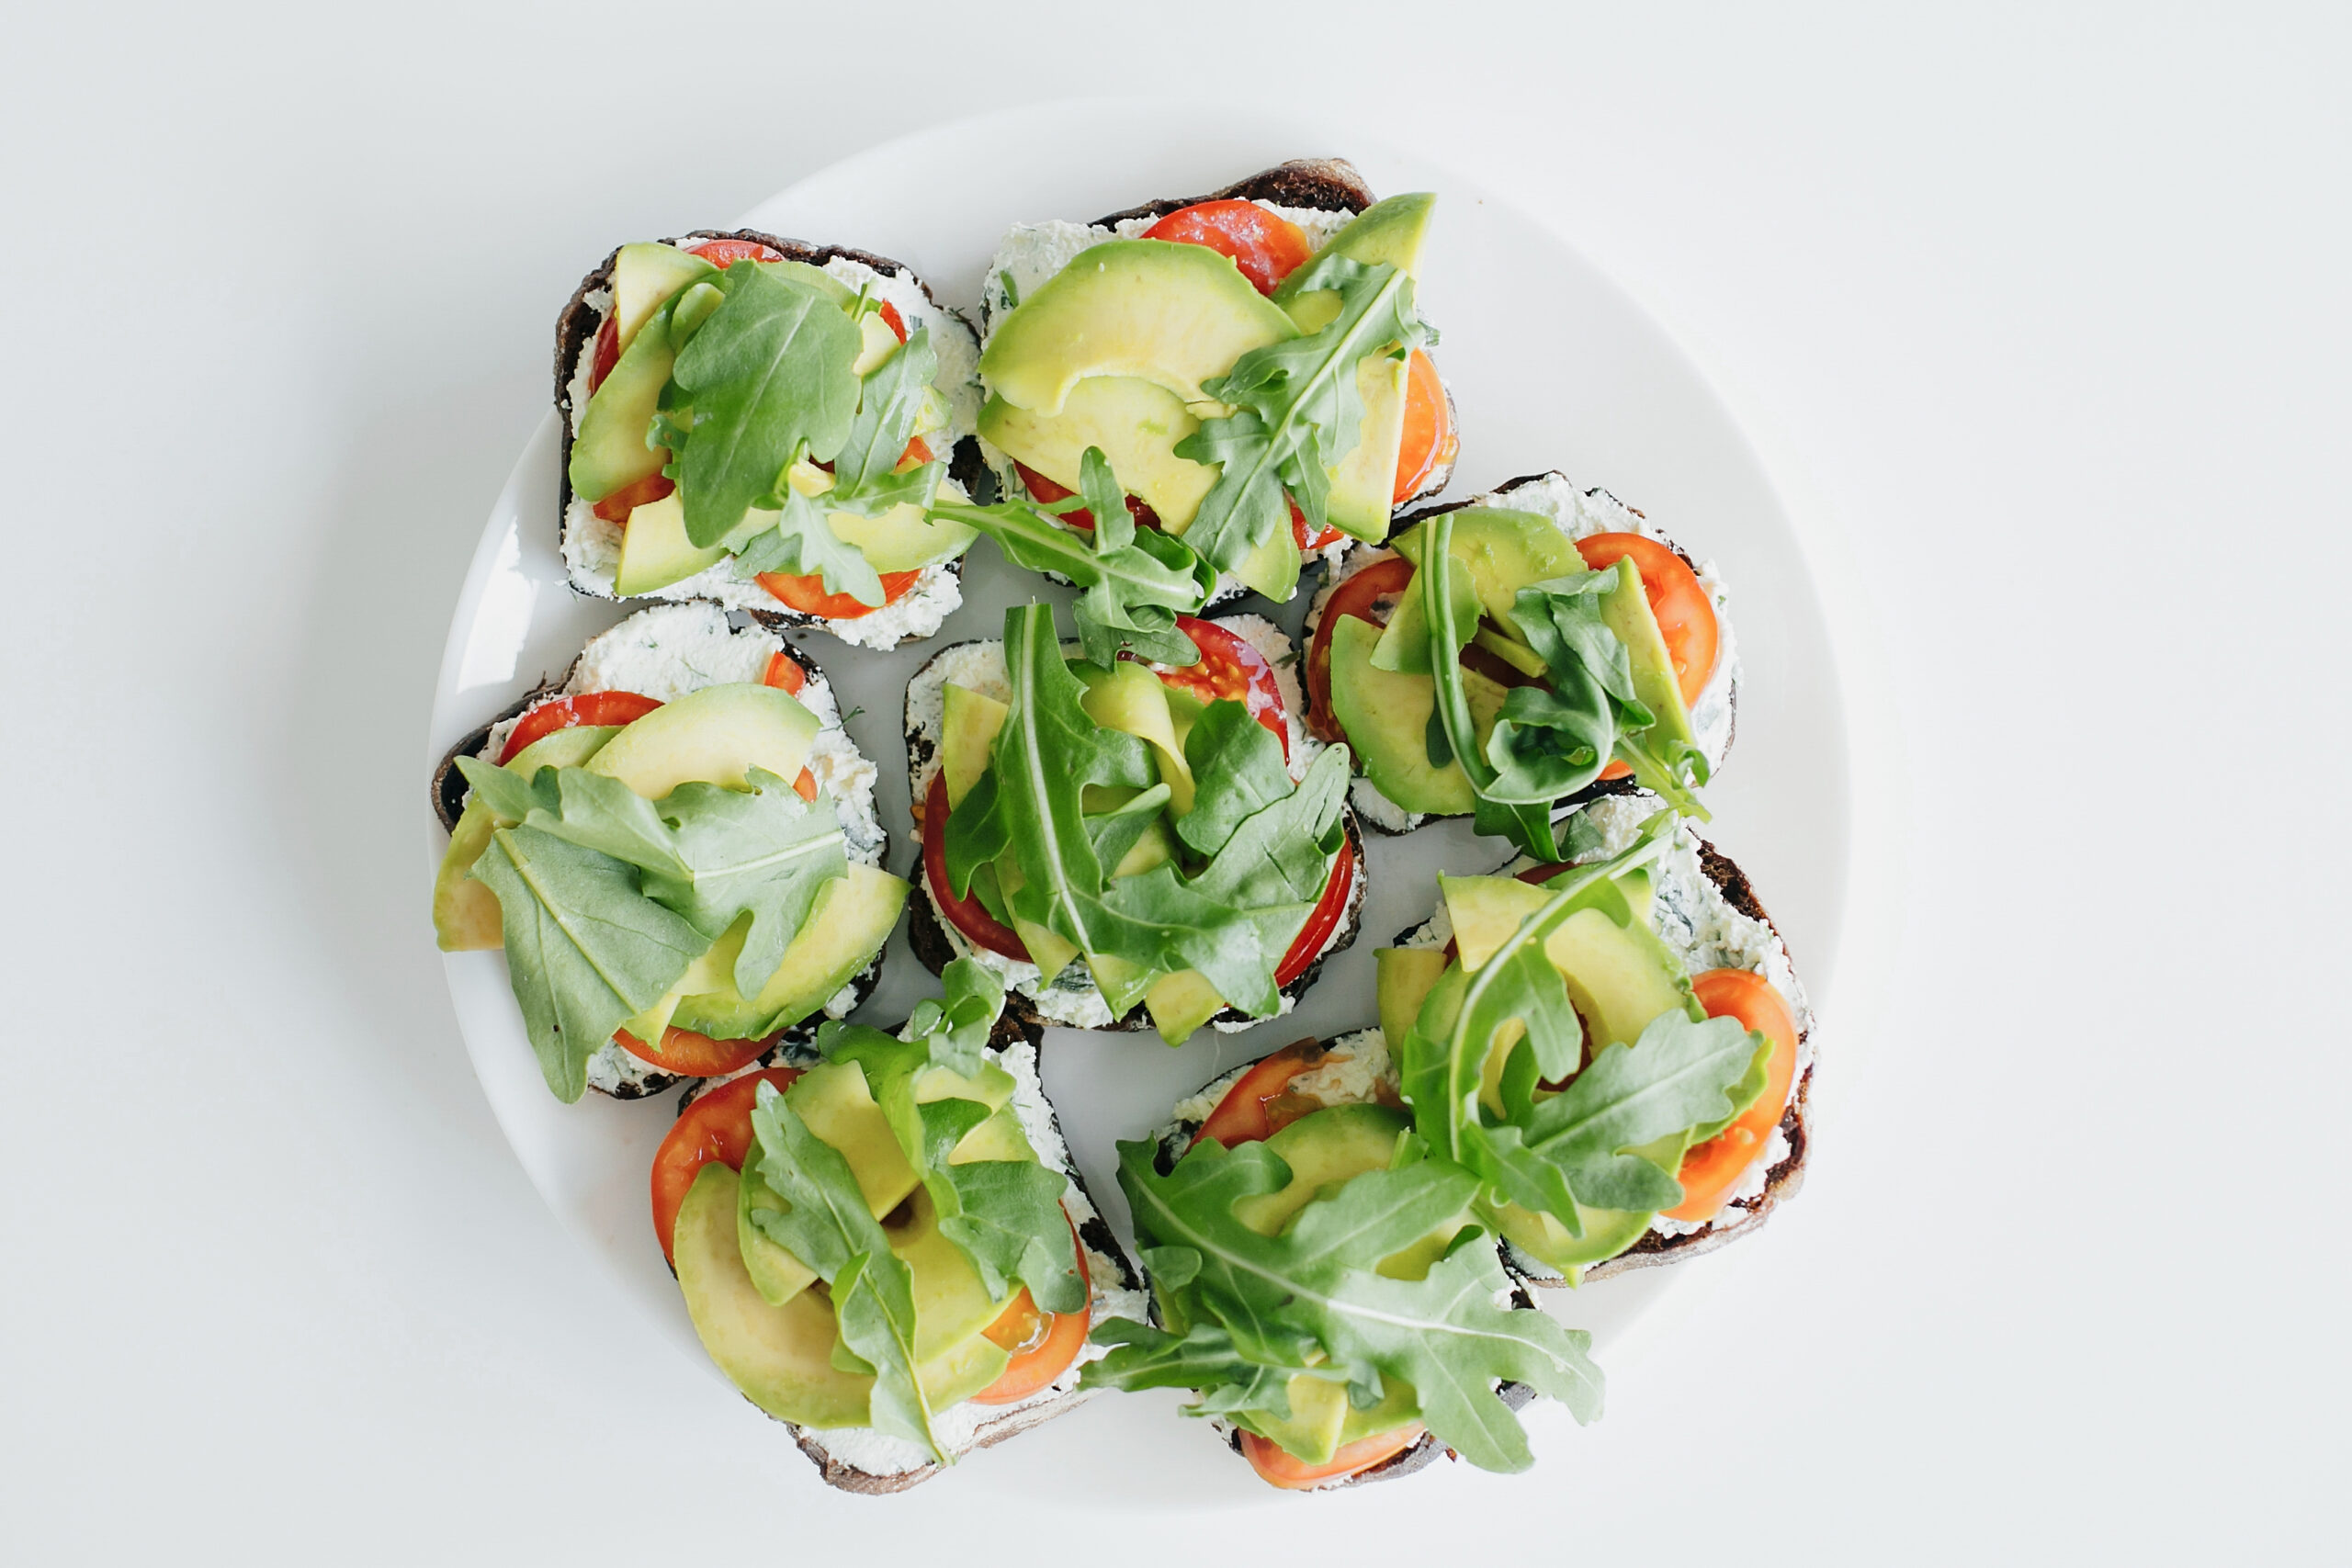 Rules of a Healthy Lifestyle: 7 Healthy Recipes for Toasts with Avocado Sea Salt,Benefits,Benefits of Sea Salt